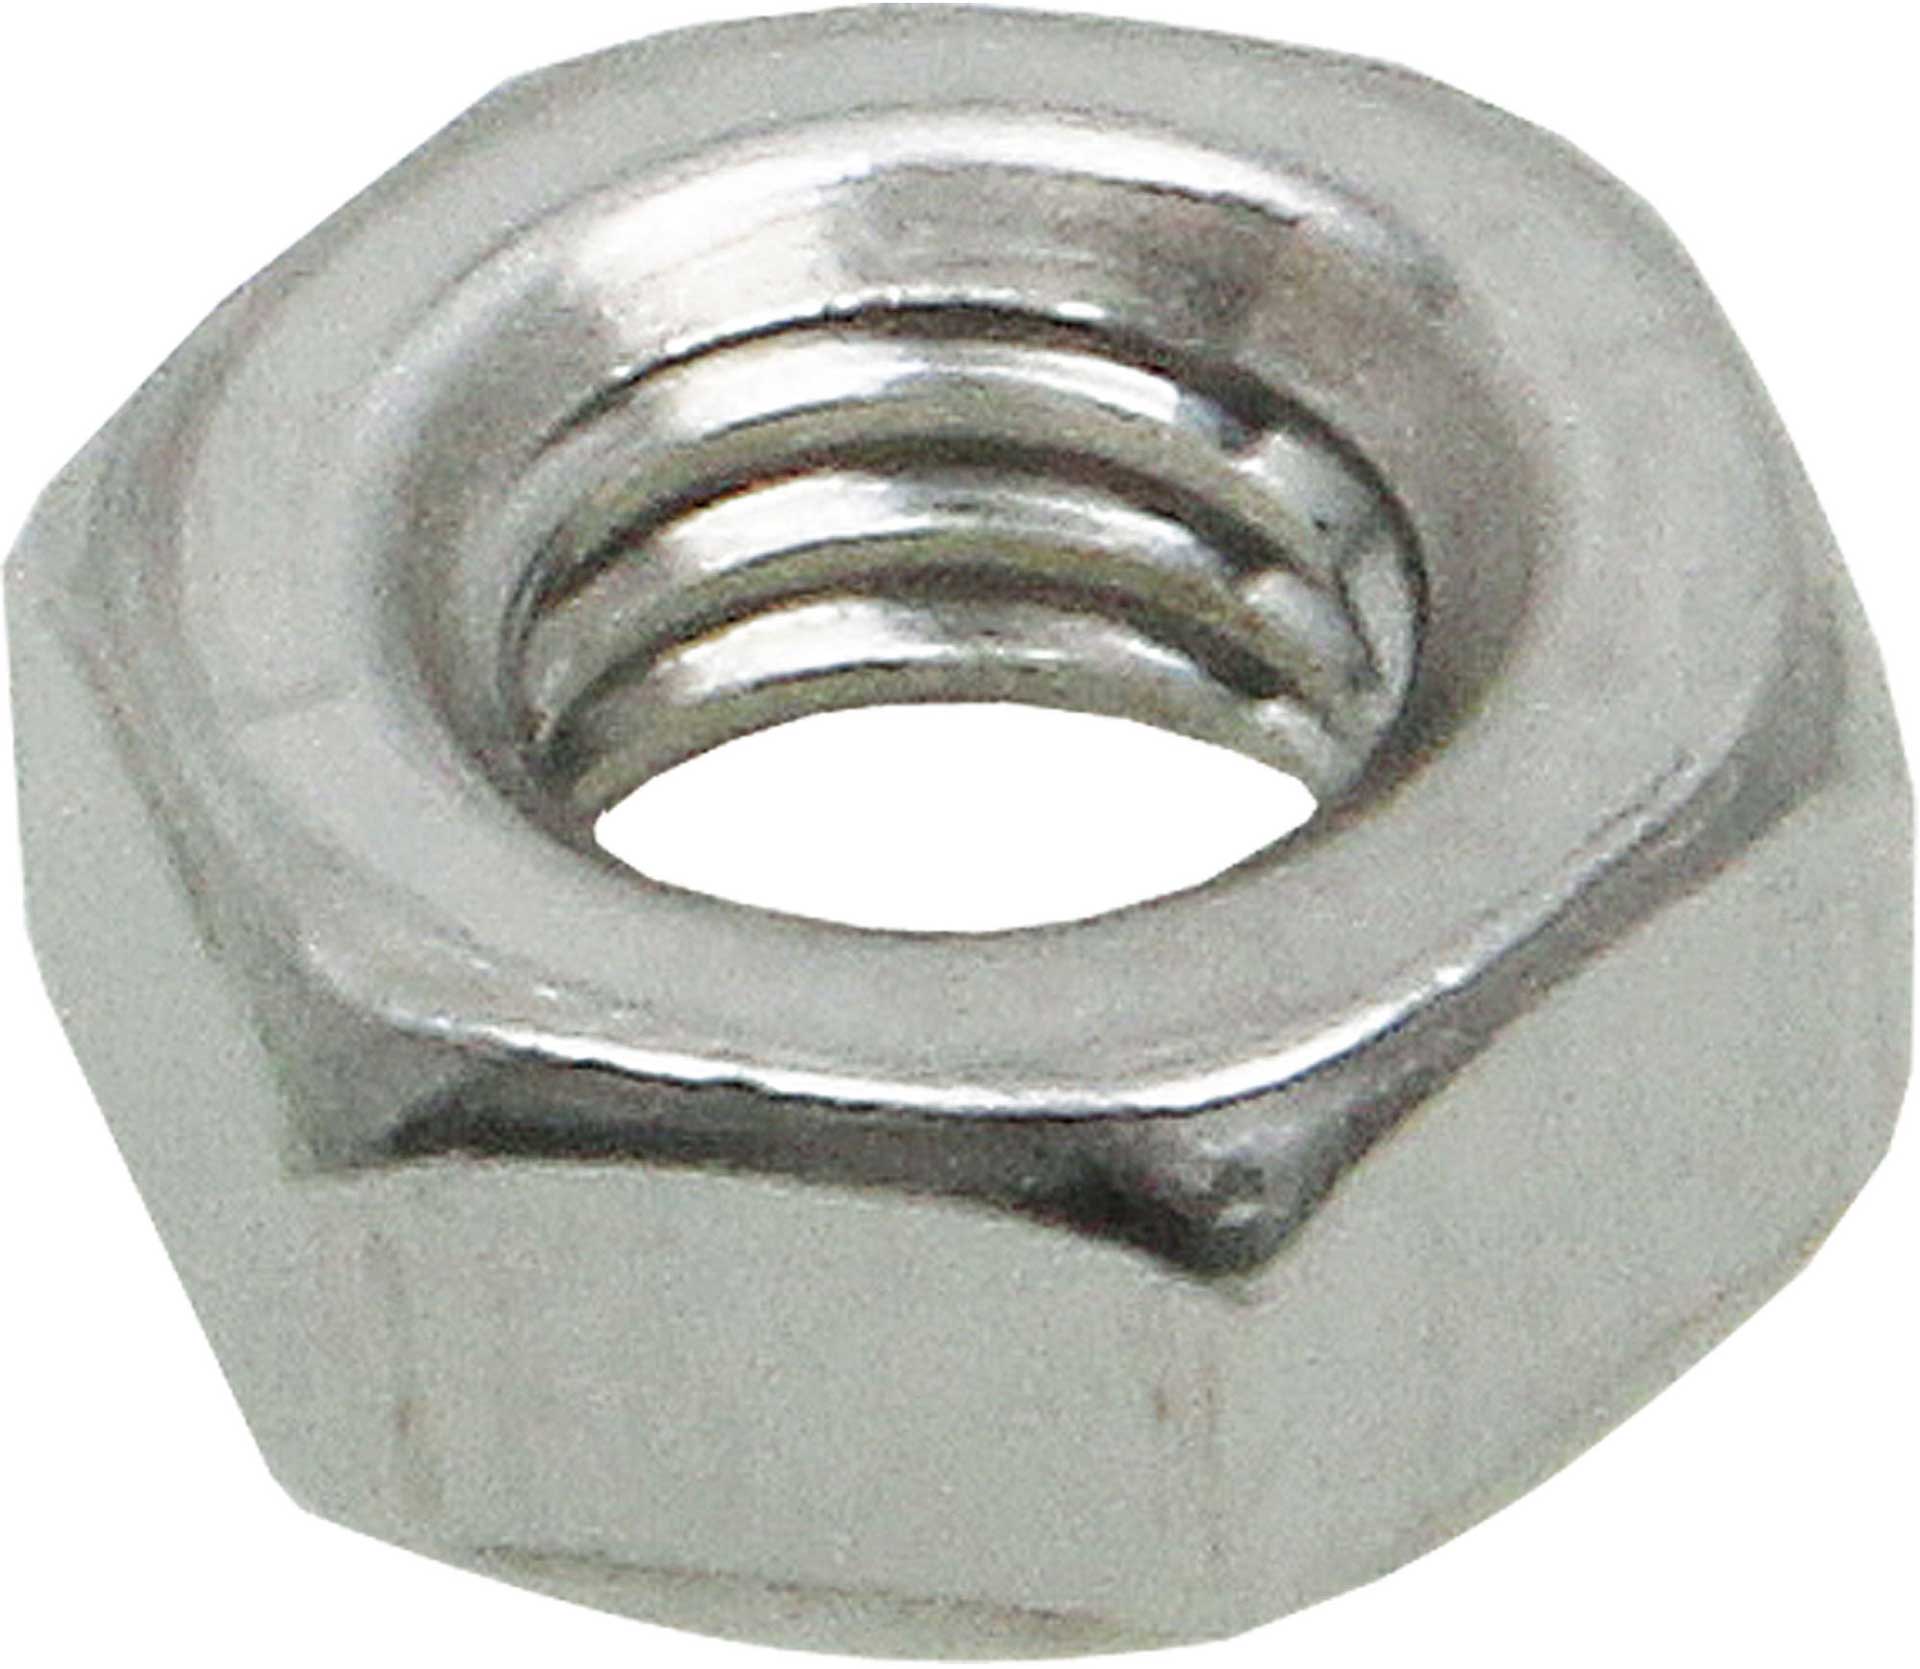 Modellbau Lindinger NUTS STAINLESS STEEL M2,5MM 10PCS.